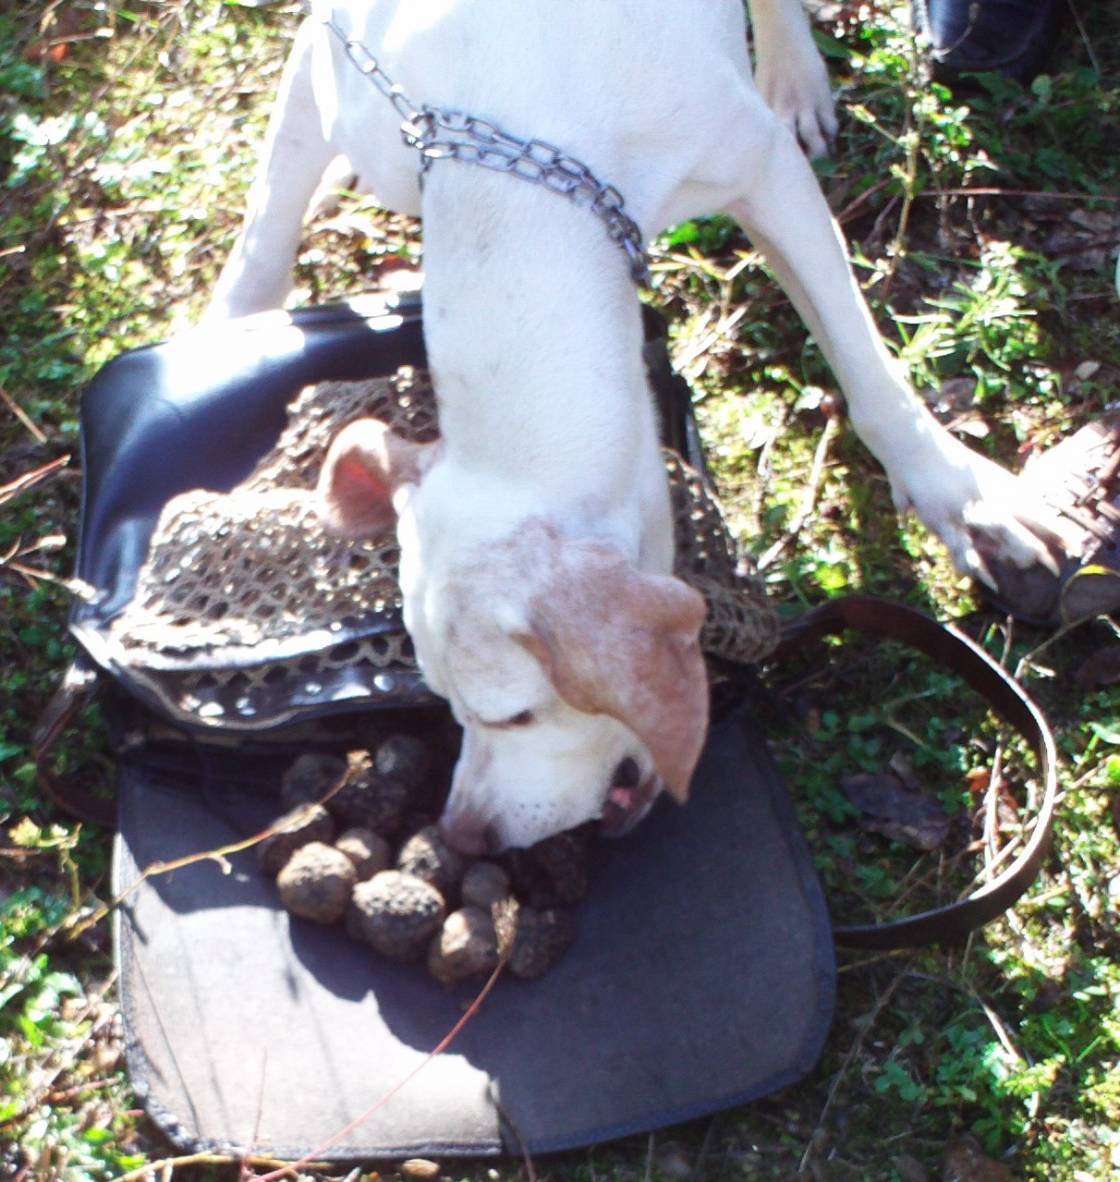 After the hunt also the truffle dog would like to have his share ...